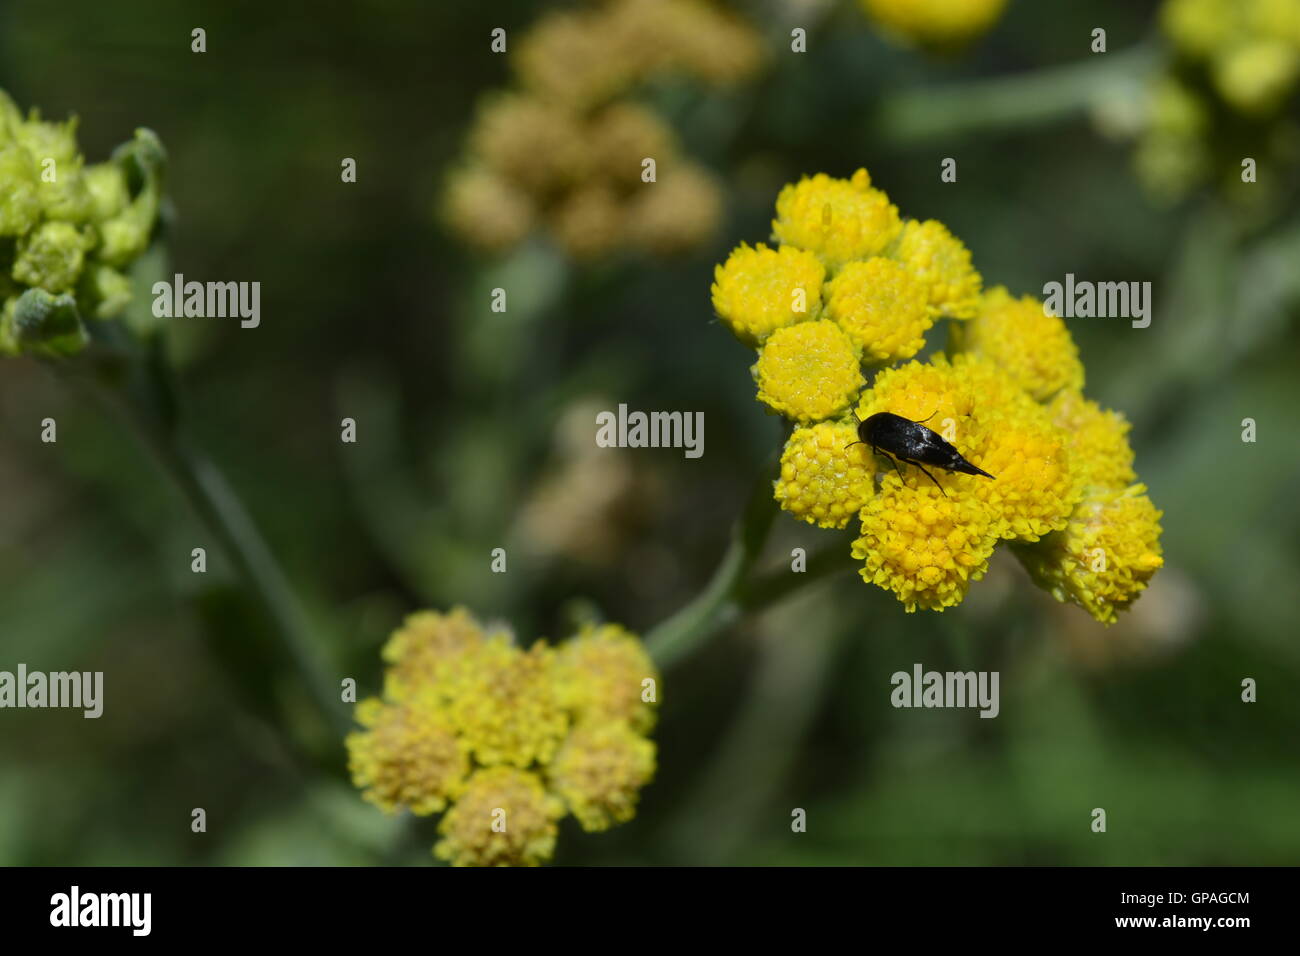 Tiny black insect on cluster yellow flowers against a soft green background. Stock Photo